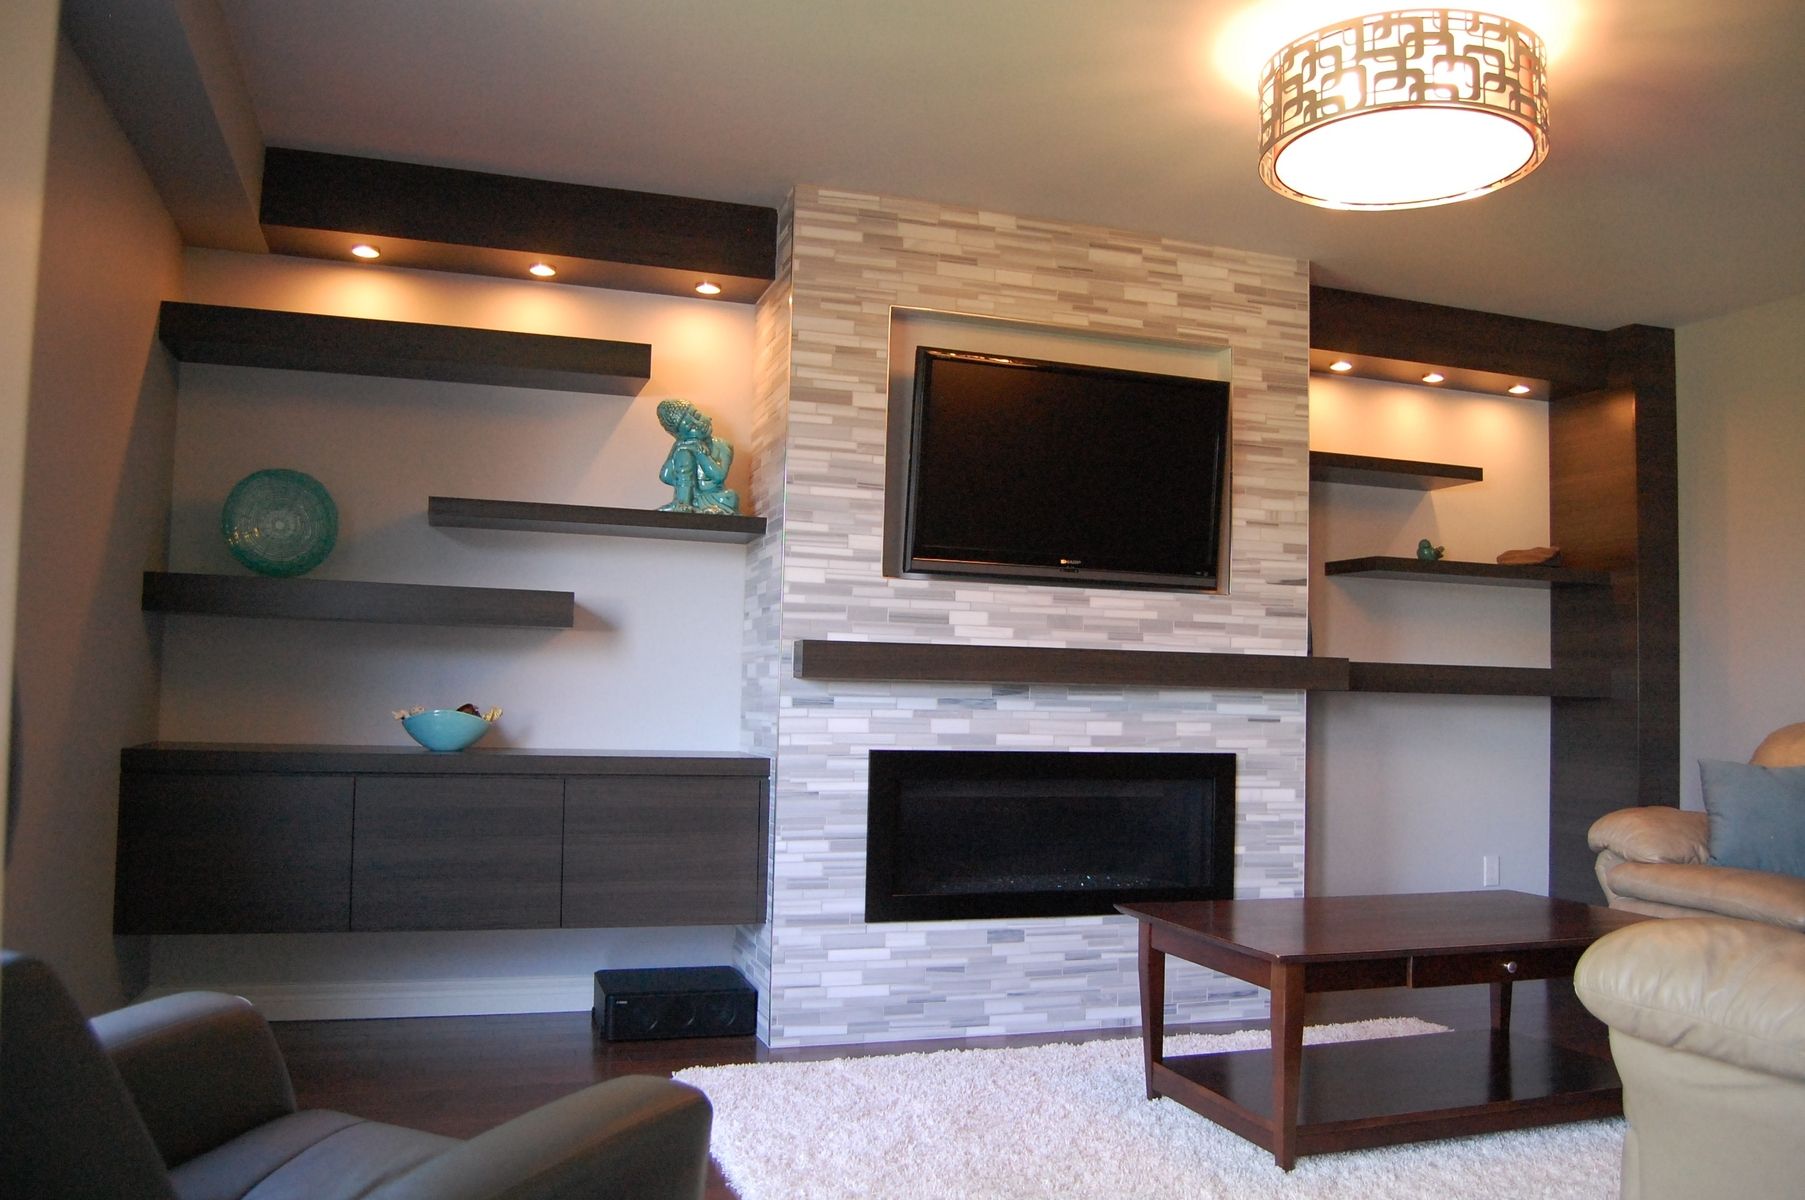 Where to Put Tv In Living Room with Fireplace New Custom Modern Wall Unit Made Pletely From A Printed